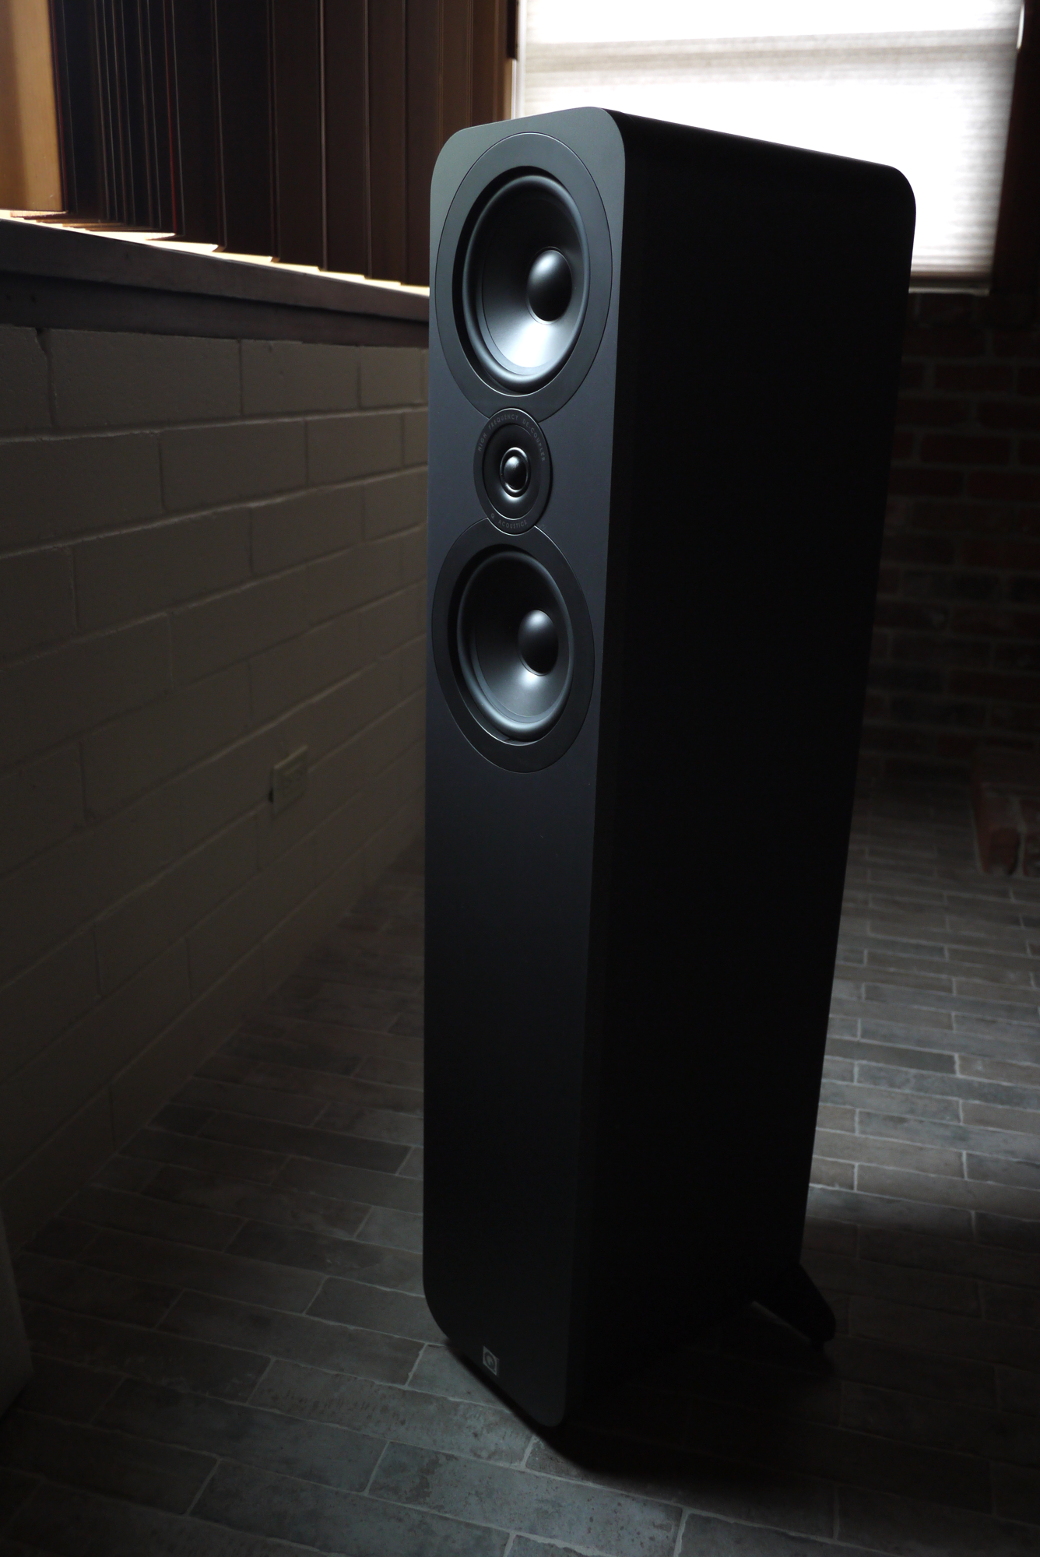 3050i Floorstanders From Q Acoustics - The Audiophile Man